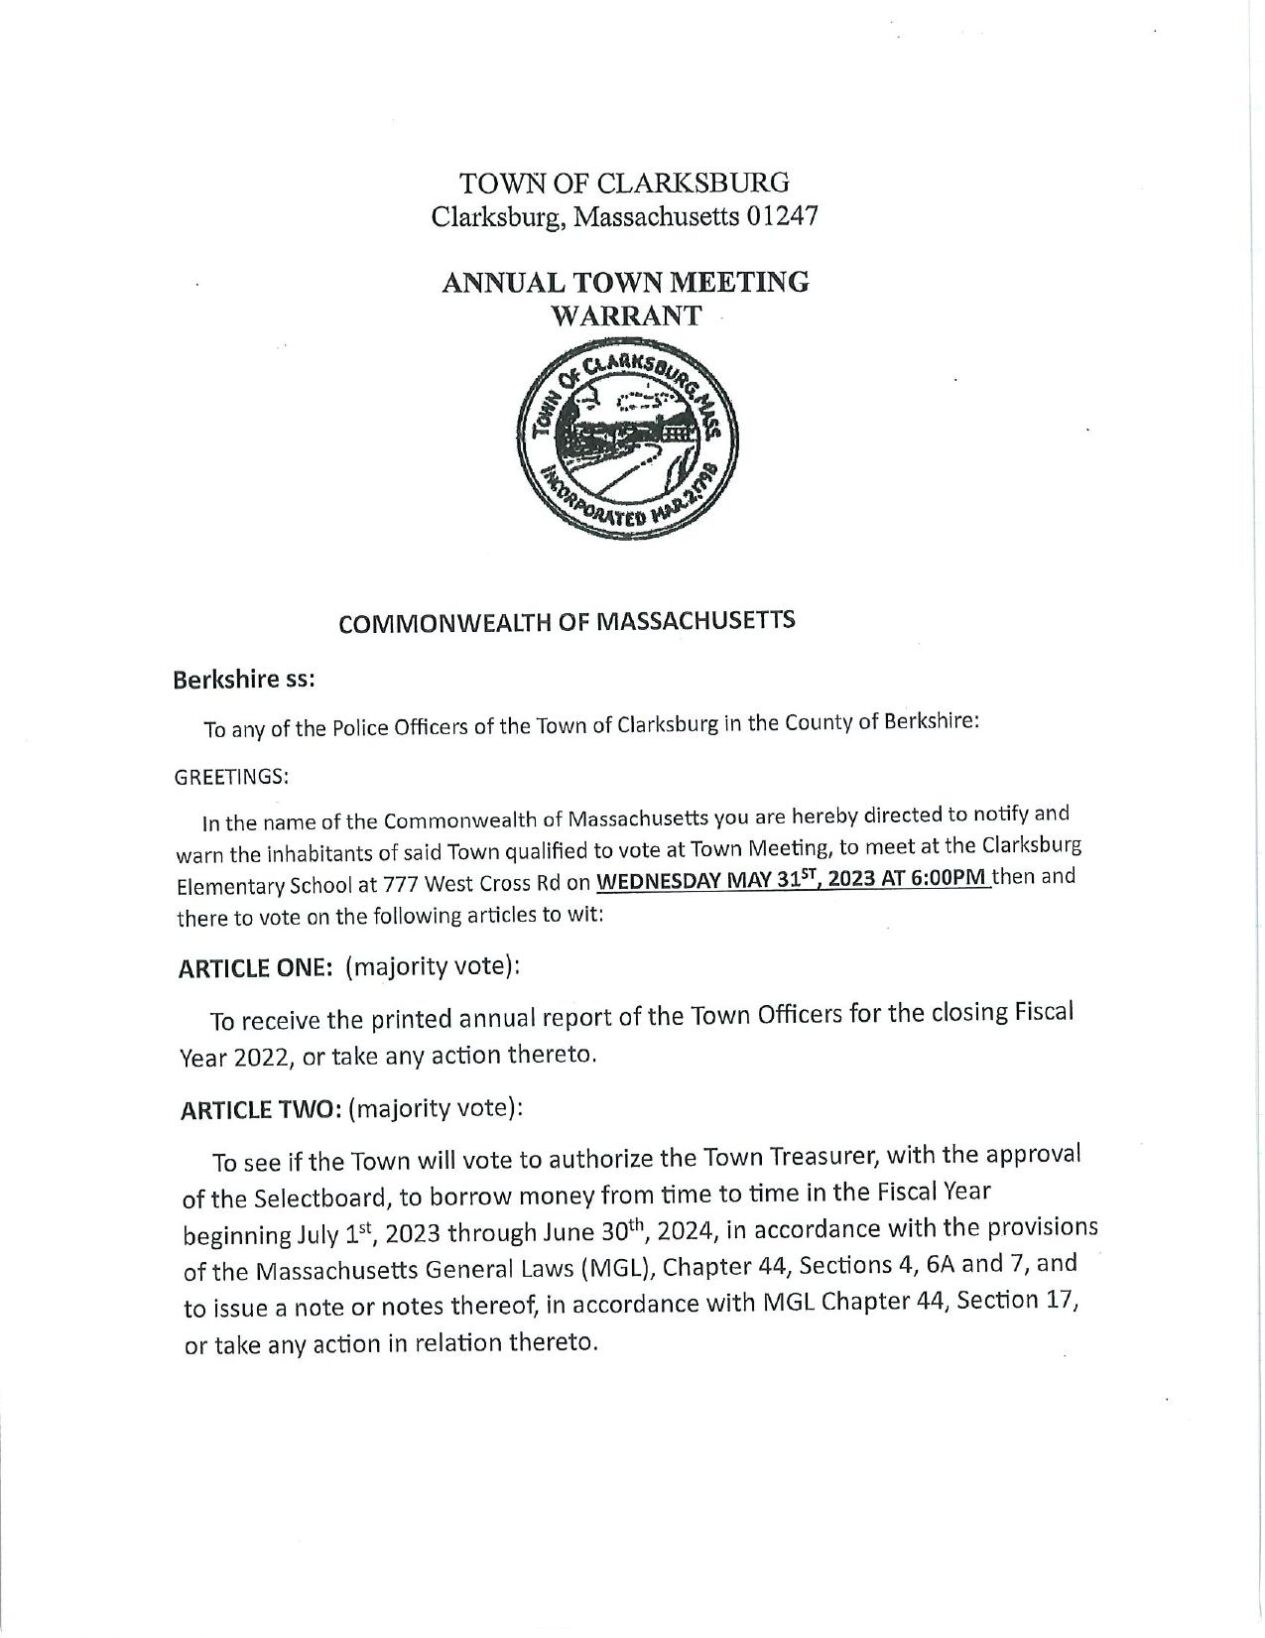 Town Meeting Warrant